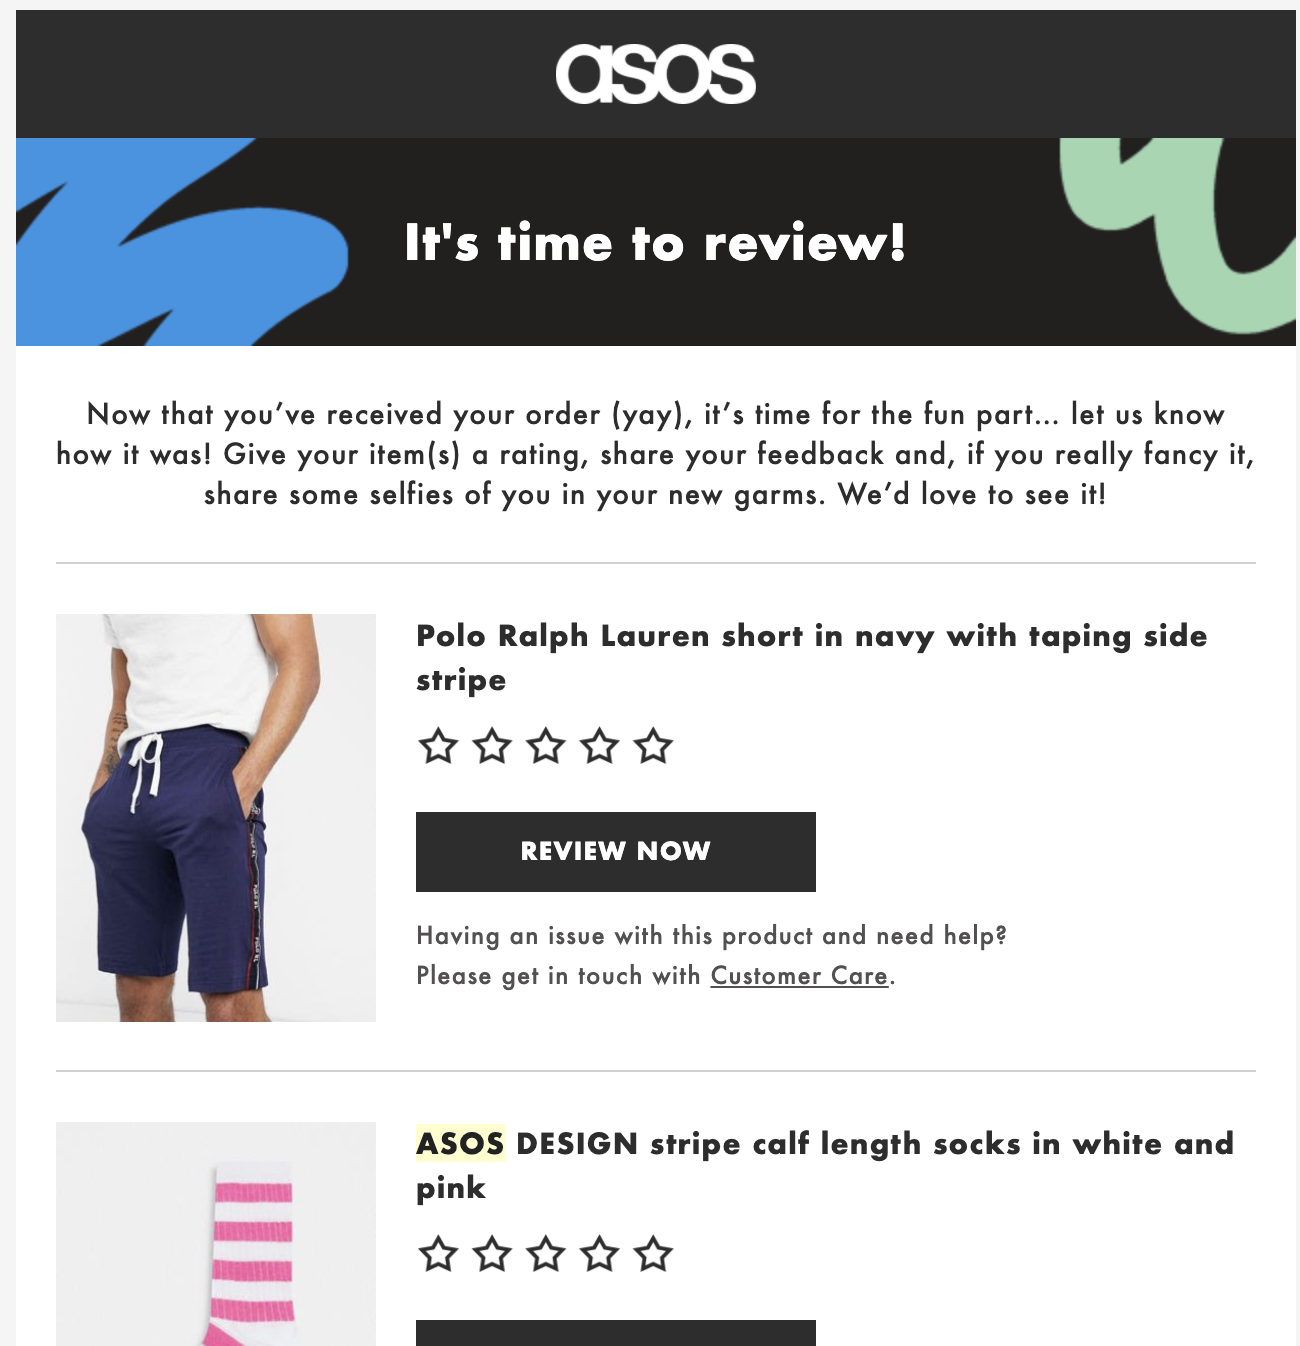 Post Purchase Email Template & Examples Free Post Purchase Email Template & Examples